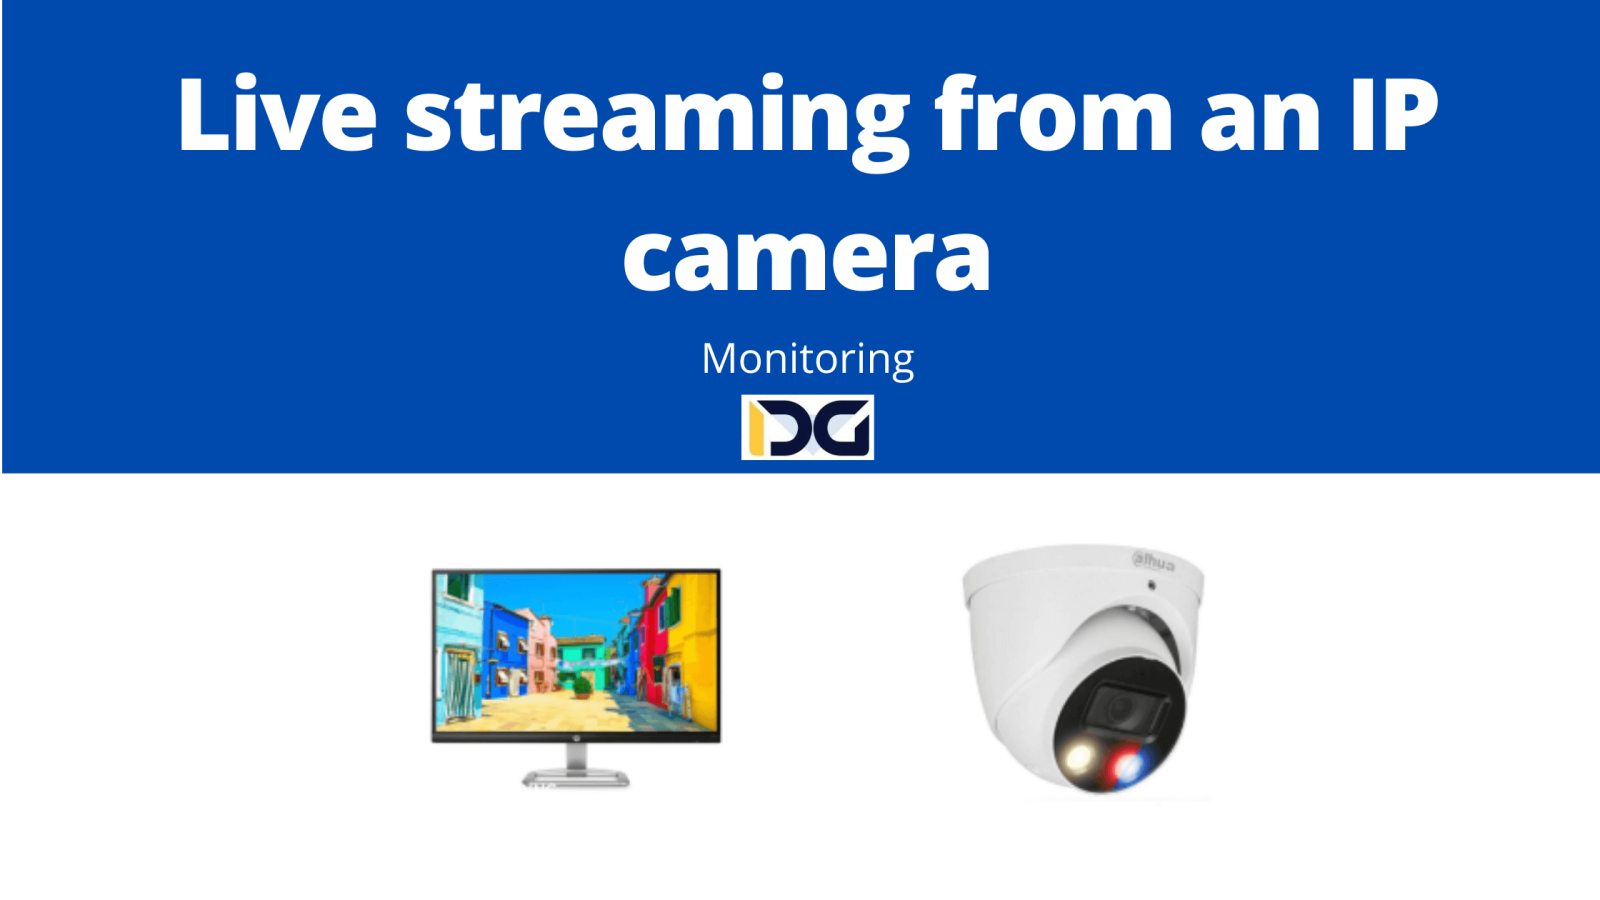 Live streaming from an IP camera